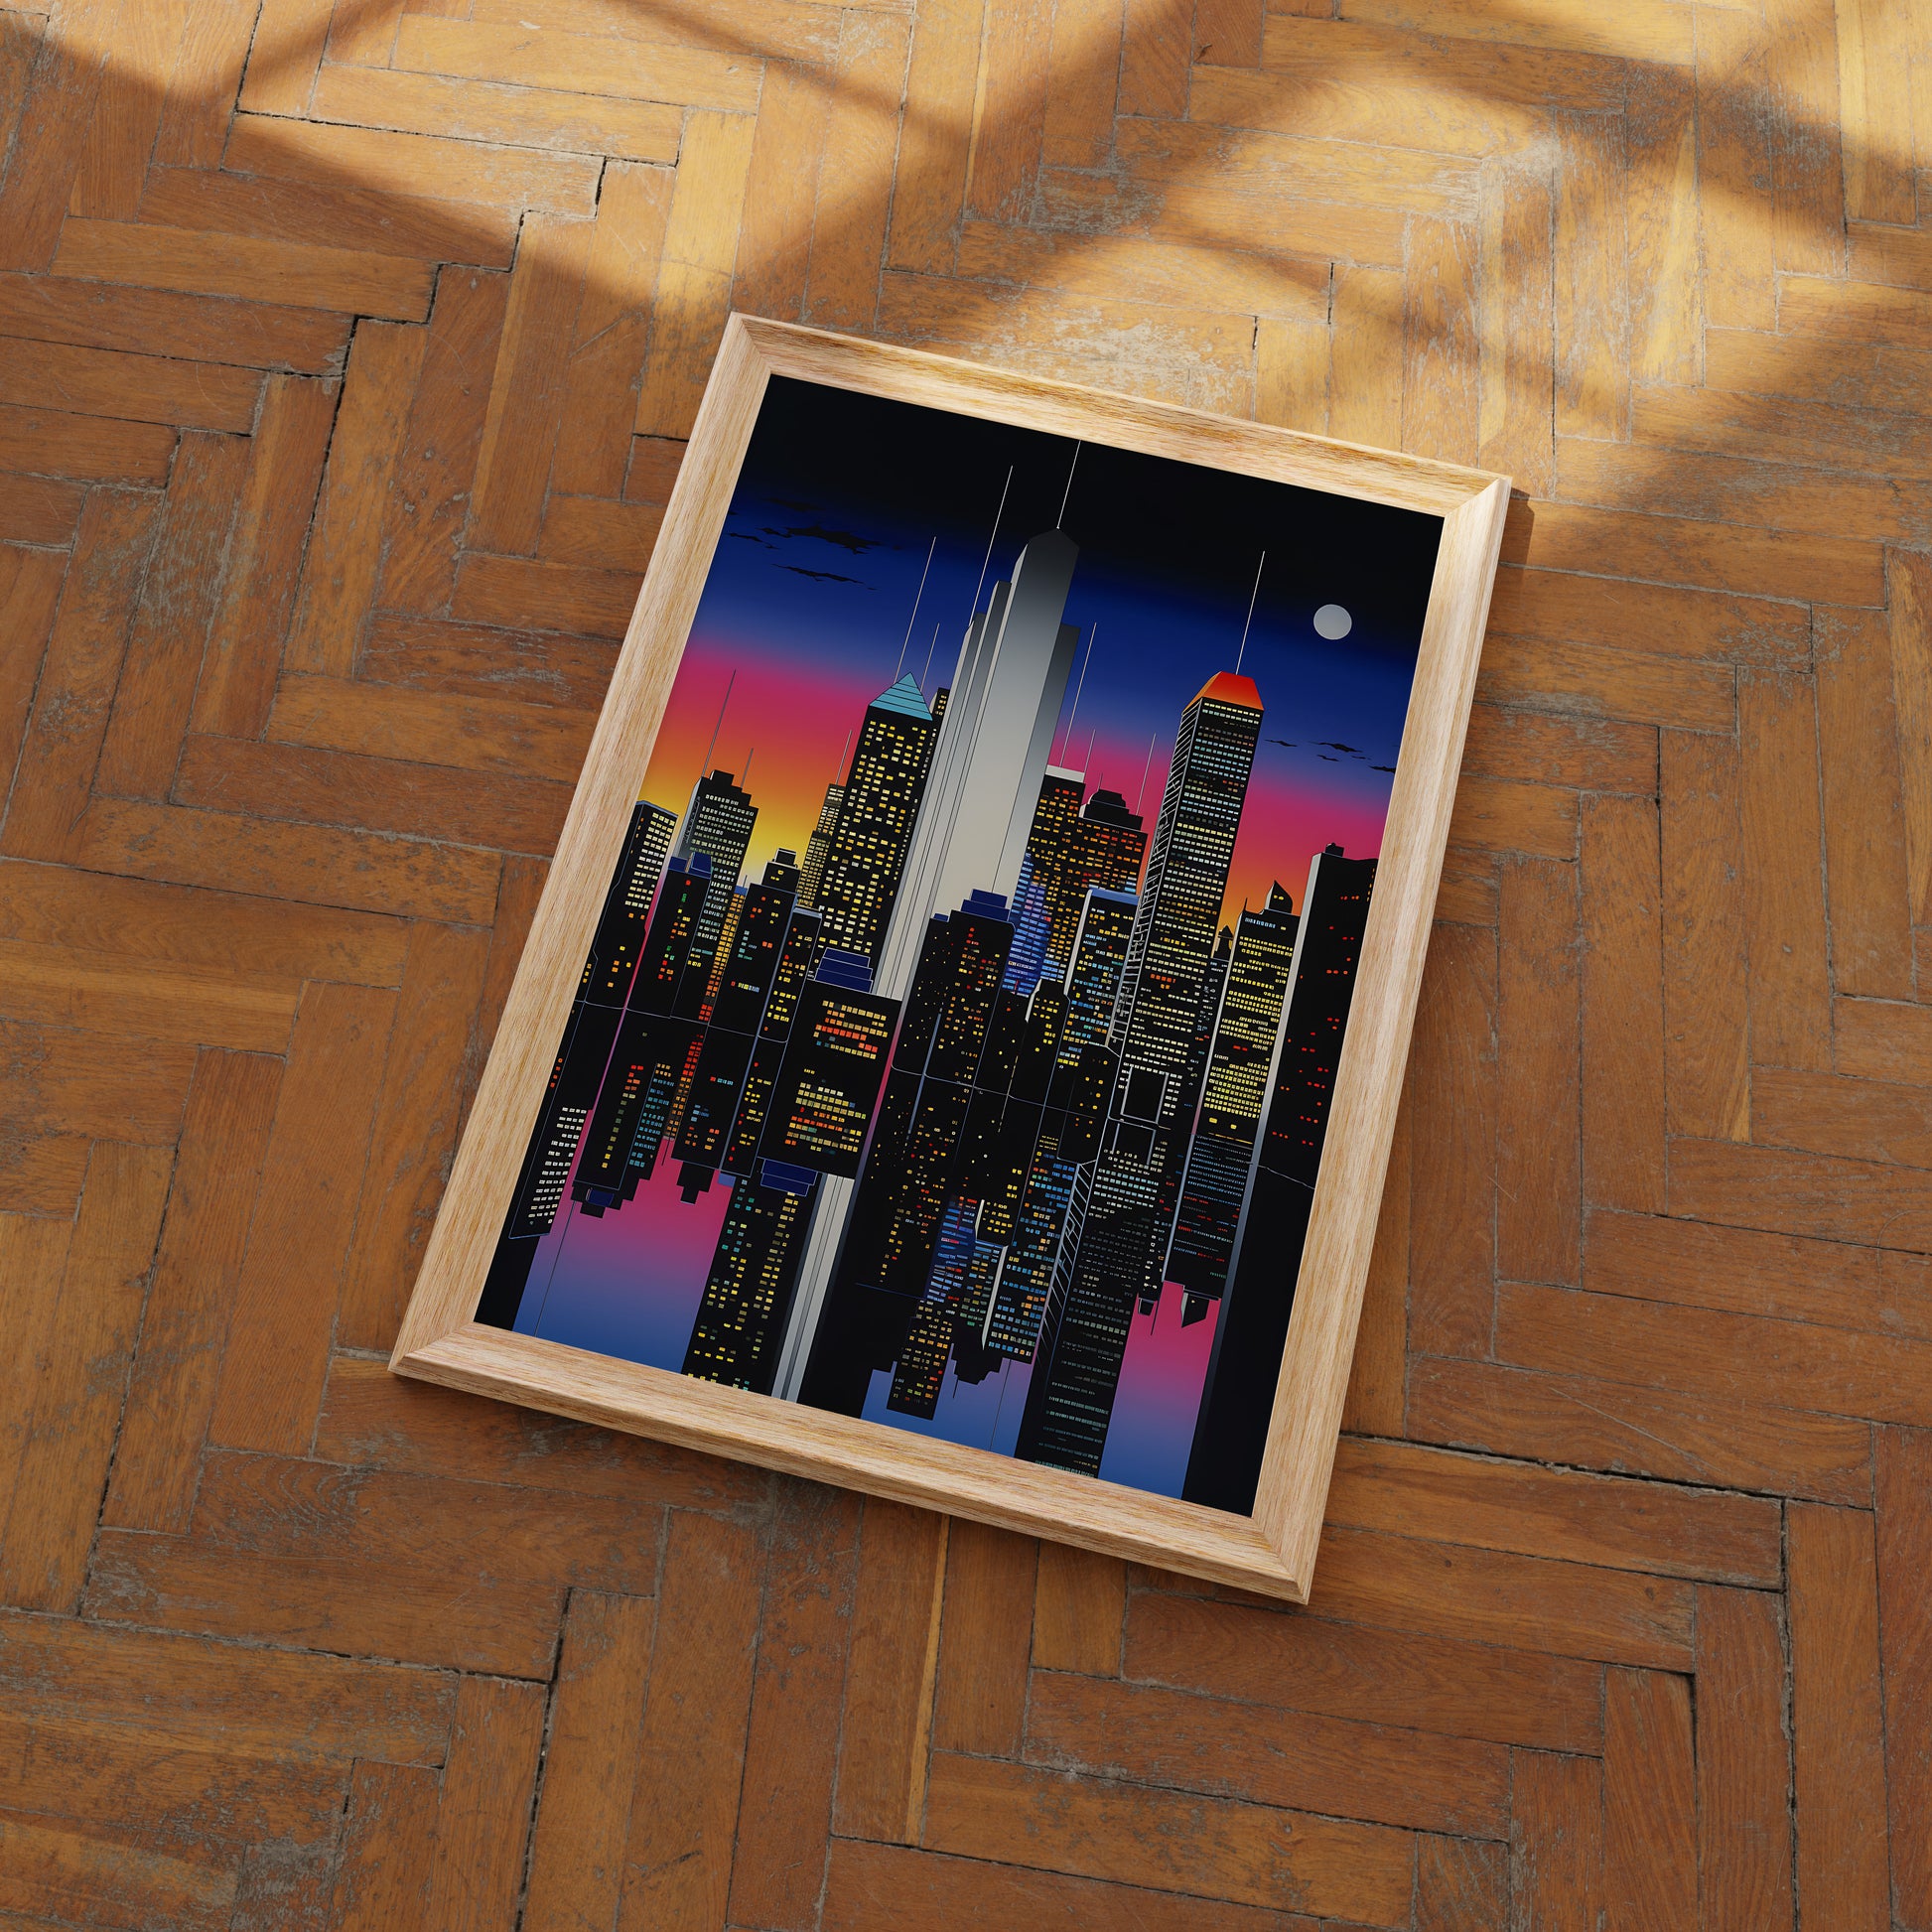 A framed cityscape poster on a wooden floor.